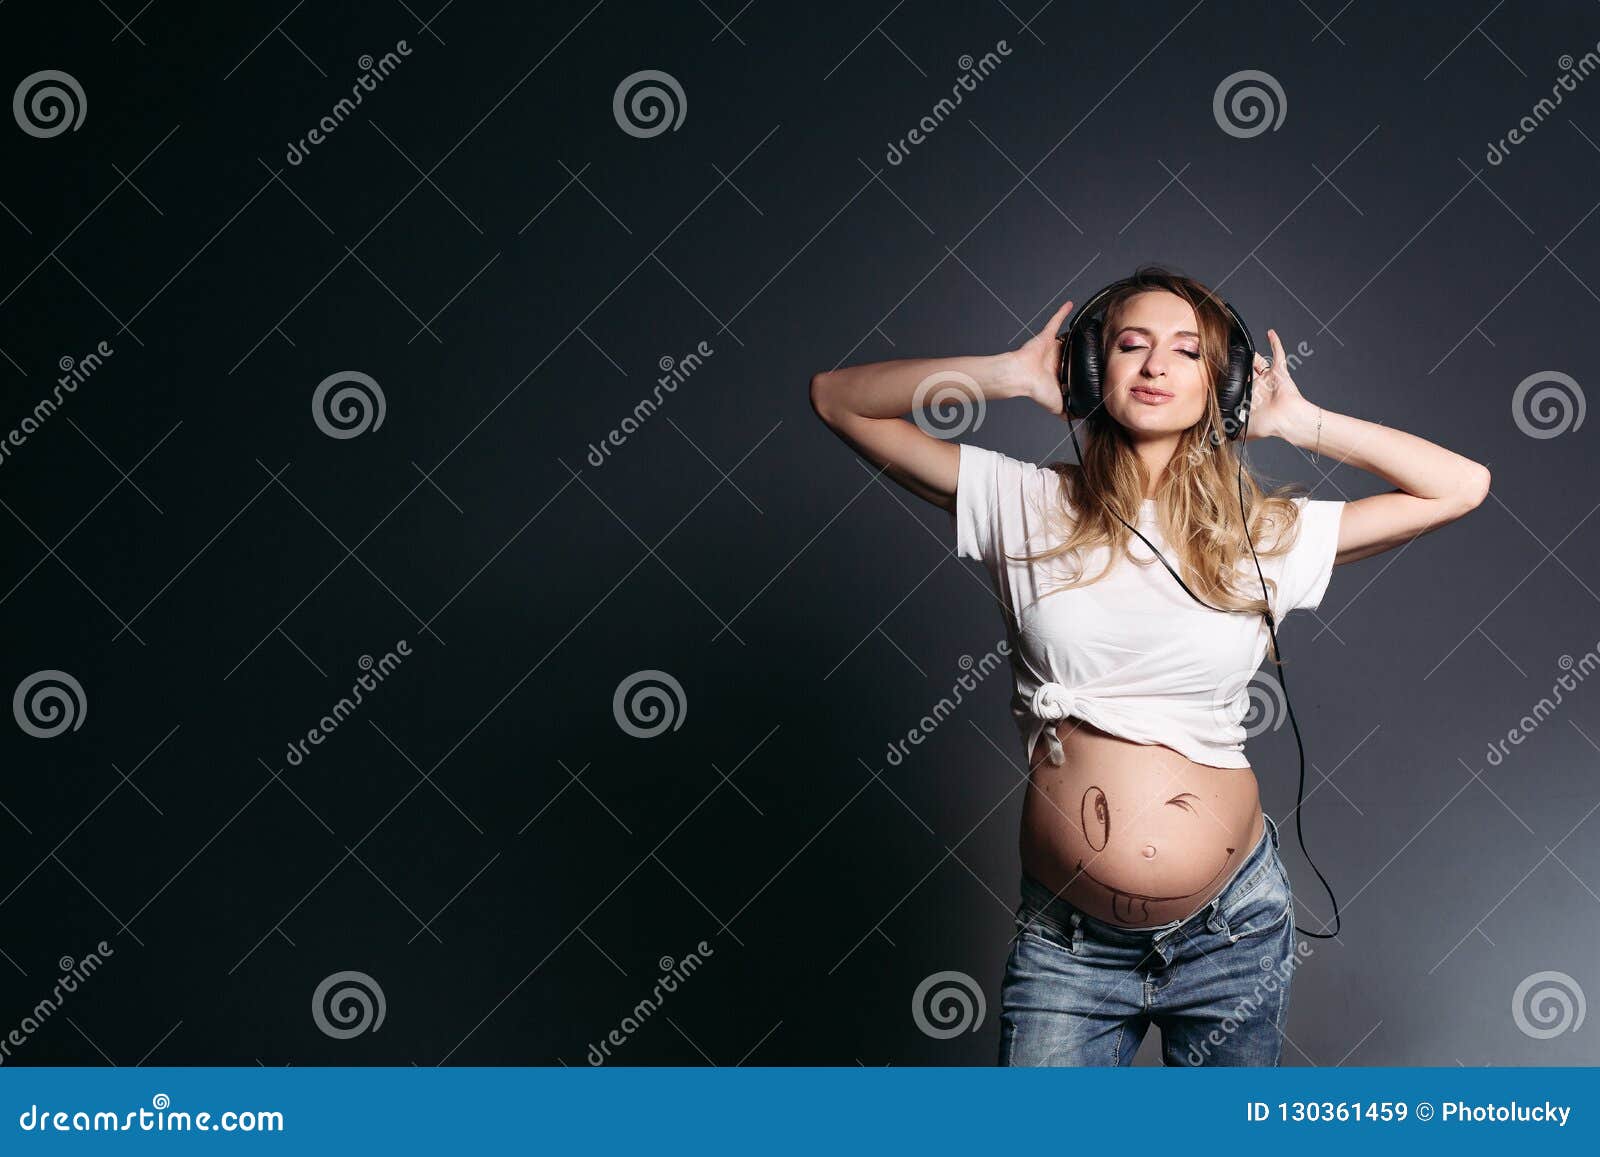 Long Hair Pregnant Nude - Pregnant Woman Dancing and Smiling with Closed Eyes. Stock Image - Image of  posing, cute: 130361459